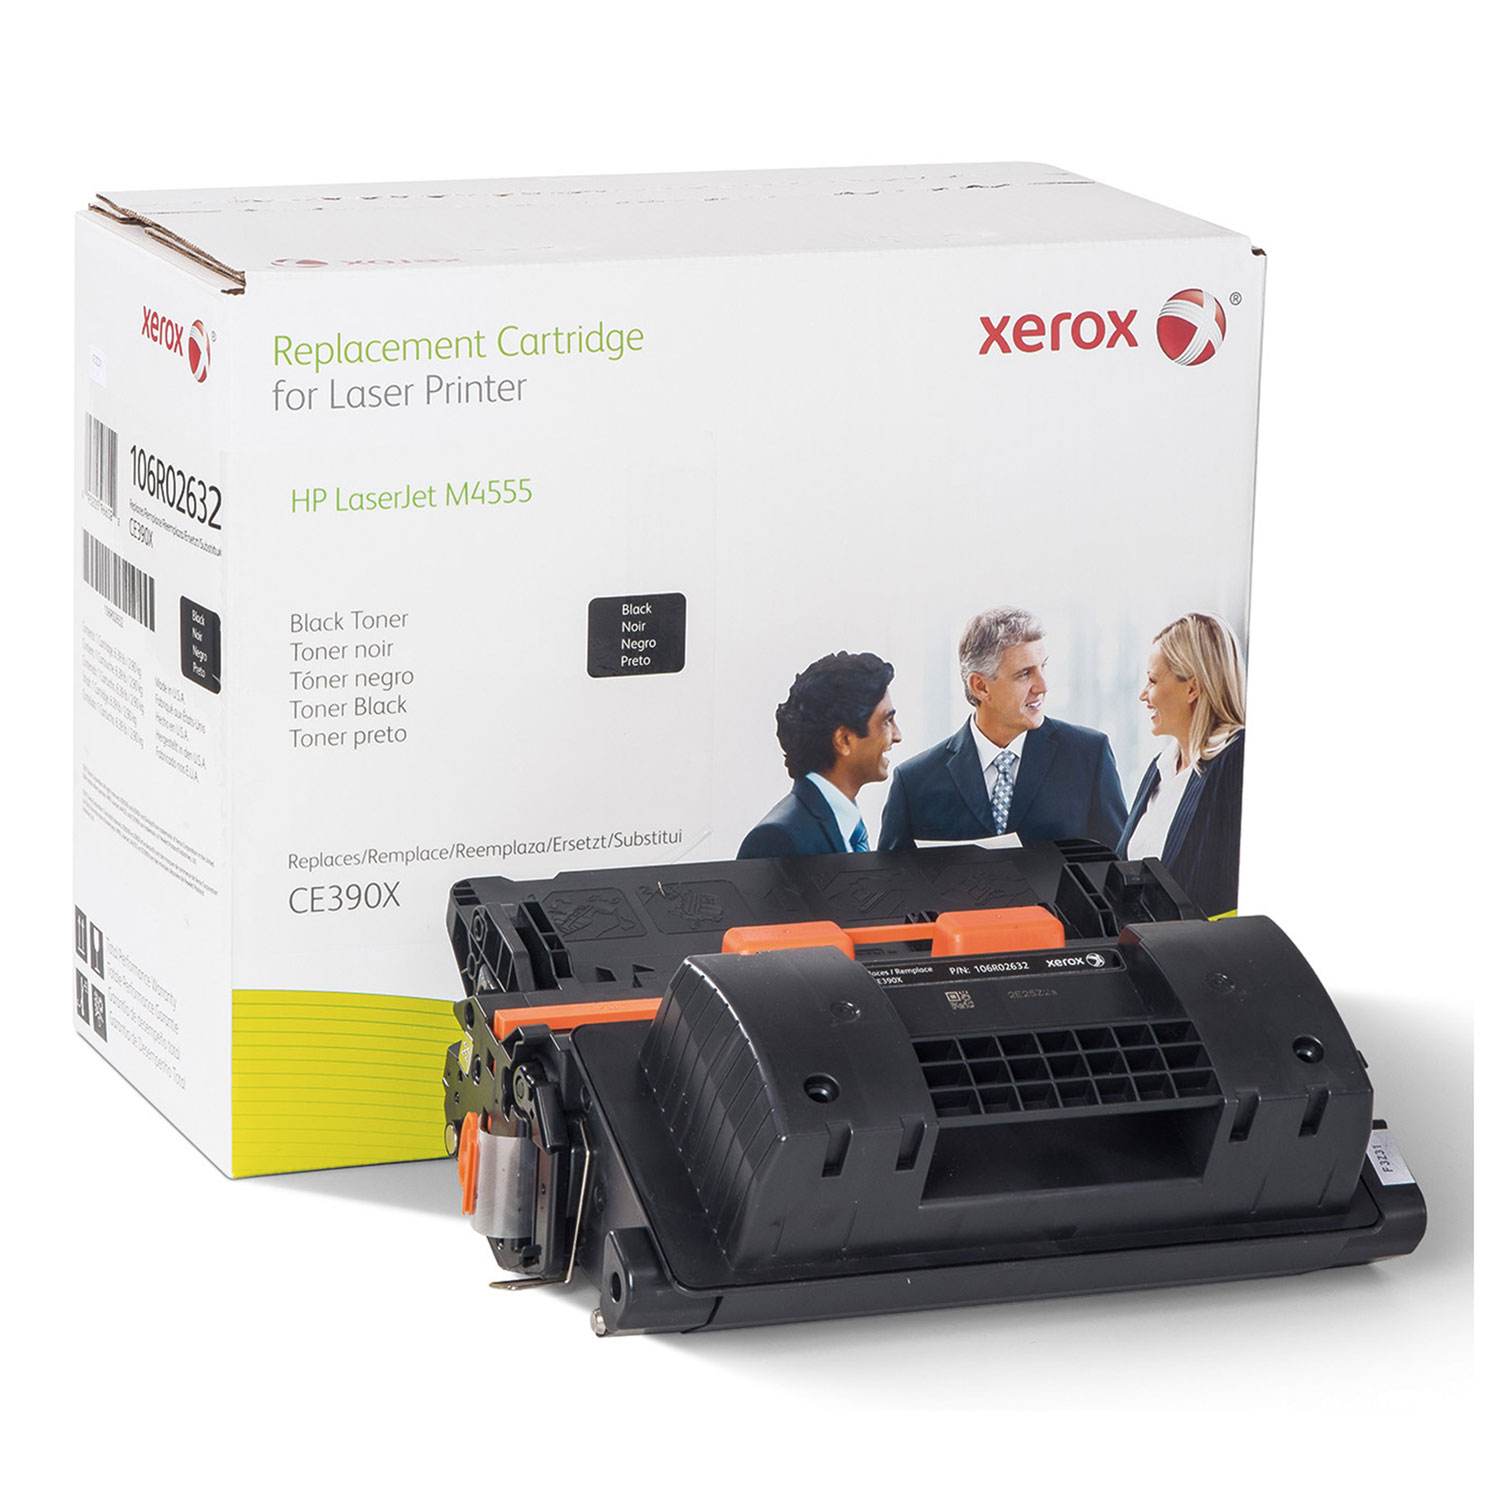  Xerox 106R02632 106R02632 Replacement High-Yield Toner for CE390X (90X), 25400 Page Yield, Black (XER106R02632) 